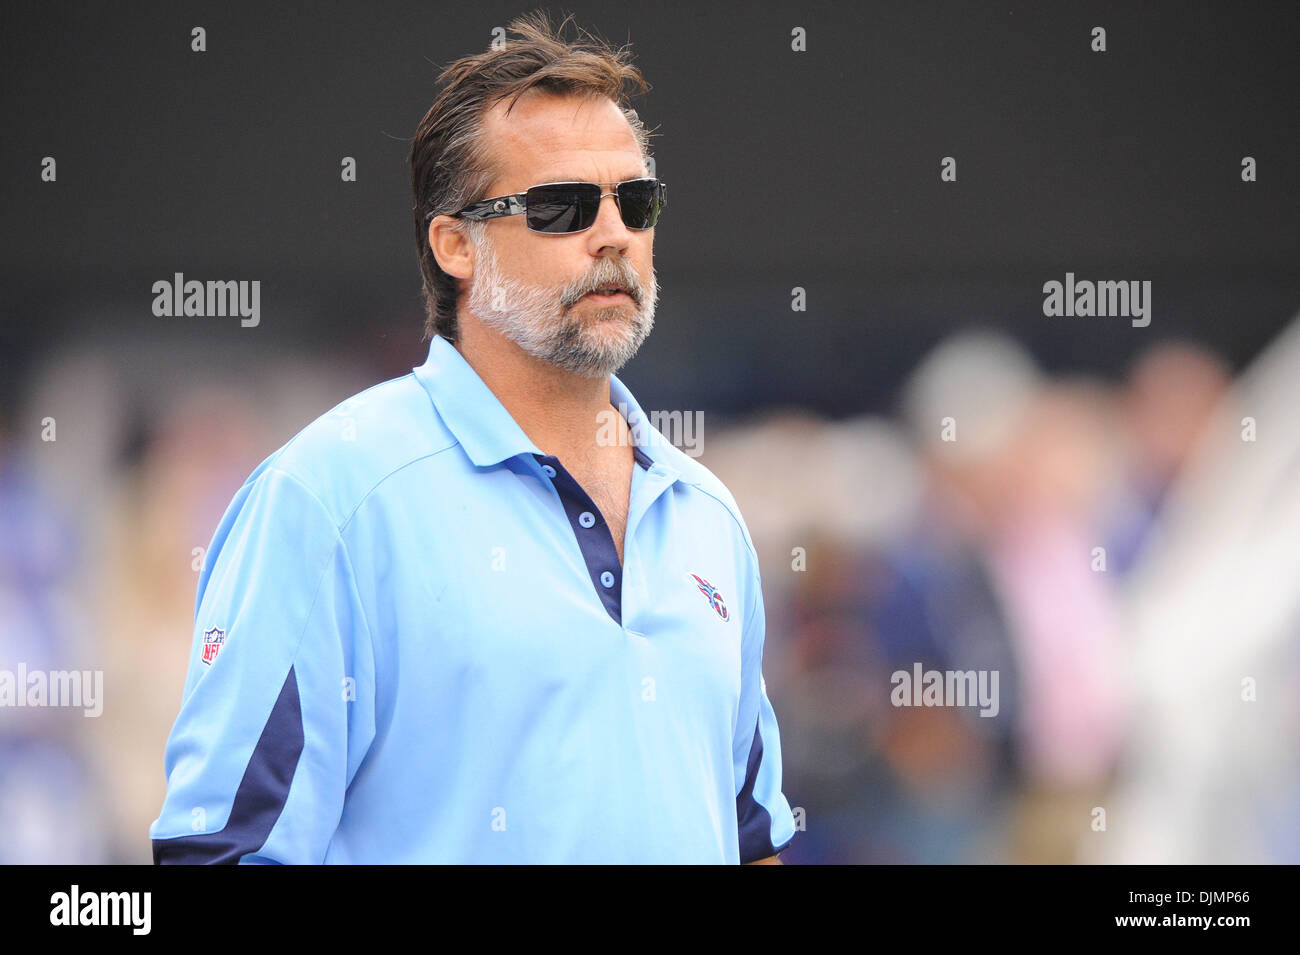 Tennessee Titans head coach Jeff Fisher during first half NFL football action between the New York Giants and Tennessee Titans at New Meadowlands Stadium in East Rutherford, New Jersey. The game is tied at half time. (Credit Image: © Will Schneekloth/Southcreek Global/ZUMApress.com) Stock Photo